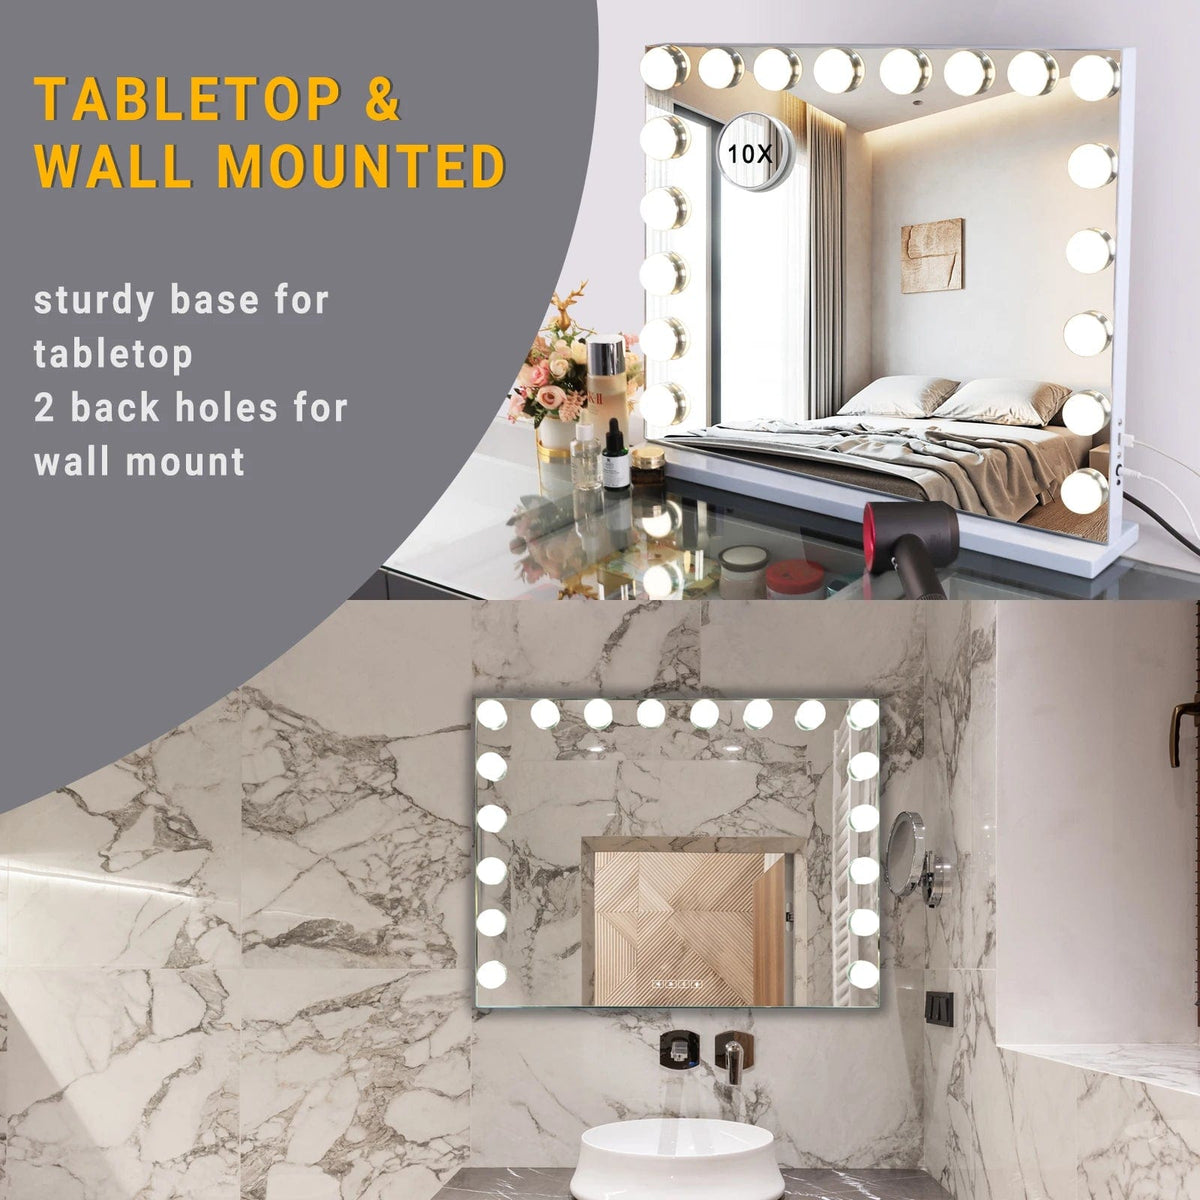 Hollywood Style LED Vanity Makeup Mirror 80x58cm - Dual Mounting, Bluetooth Speaker, Adjustable Lighting & Memory Mode Large Vanity Mirror With Lights And Bluetooth Speakers Dimmable LED Lights With 10 Times Magnification USB Port for Woman Makeup